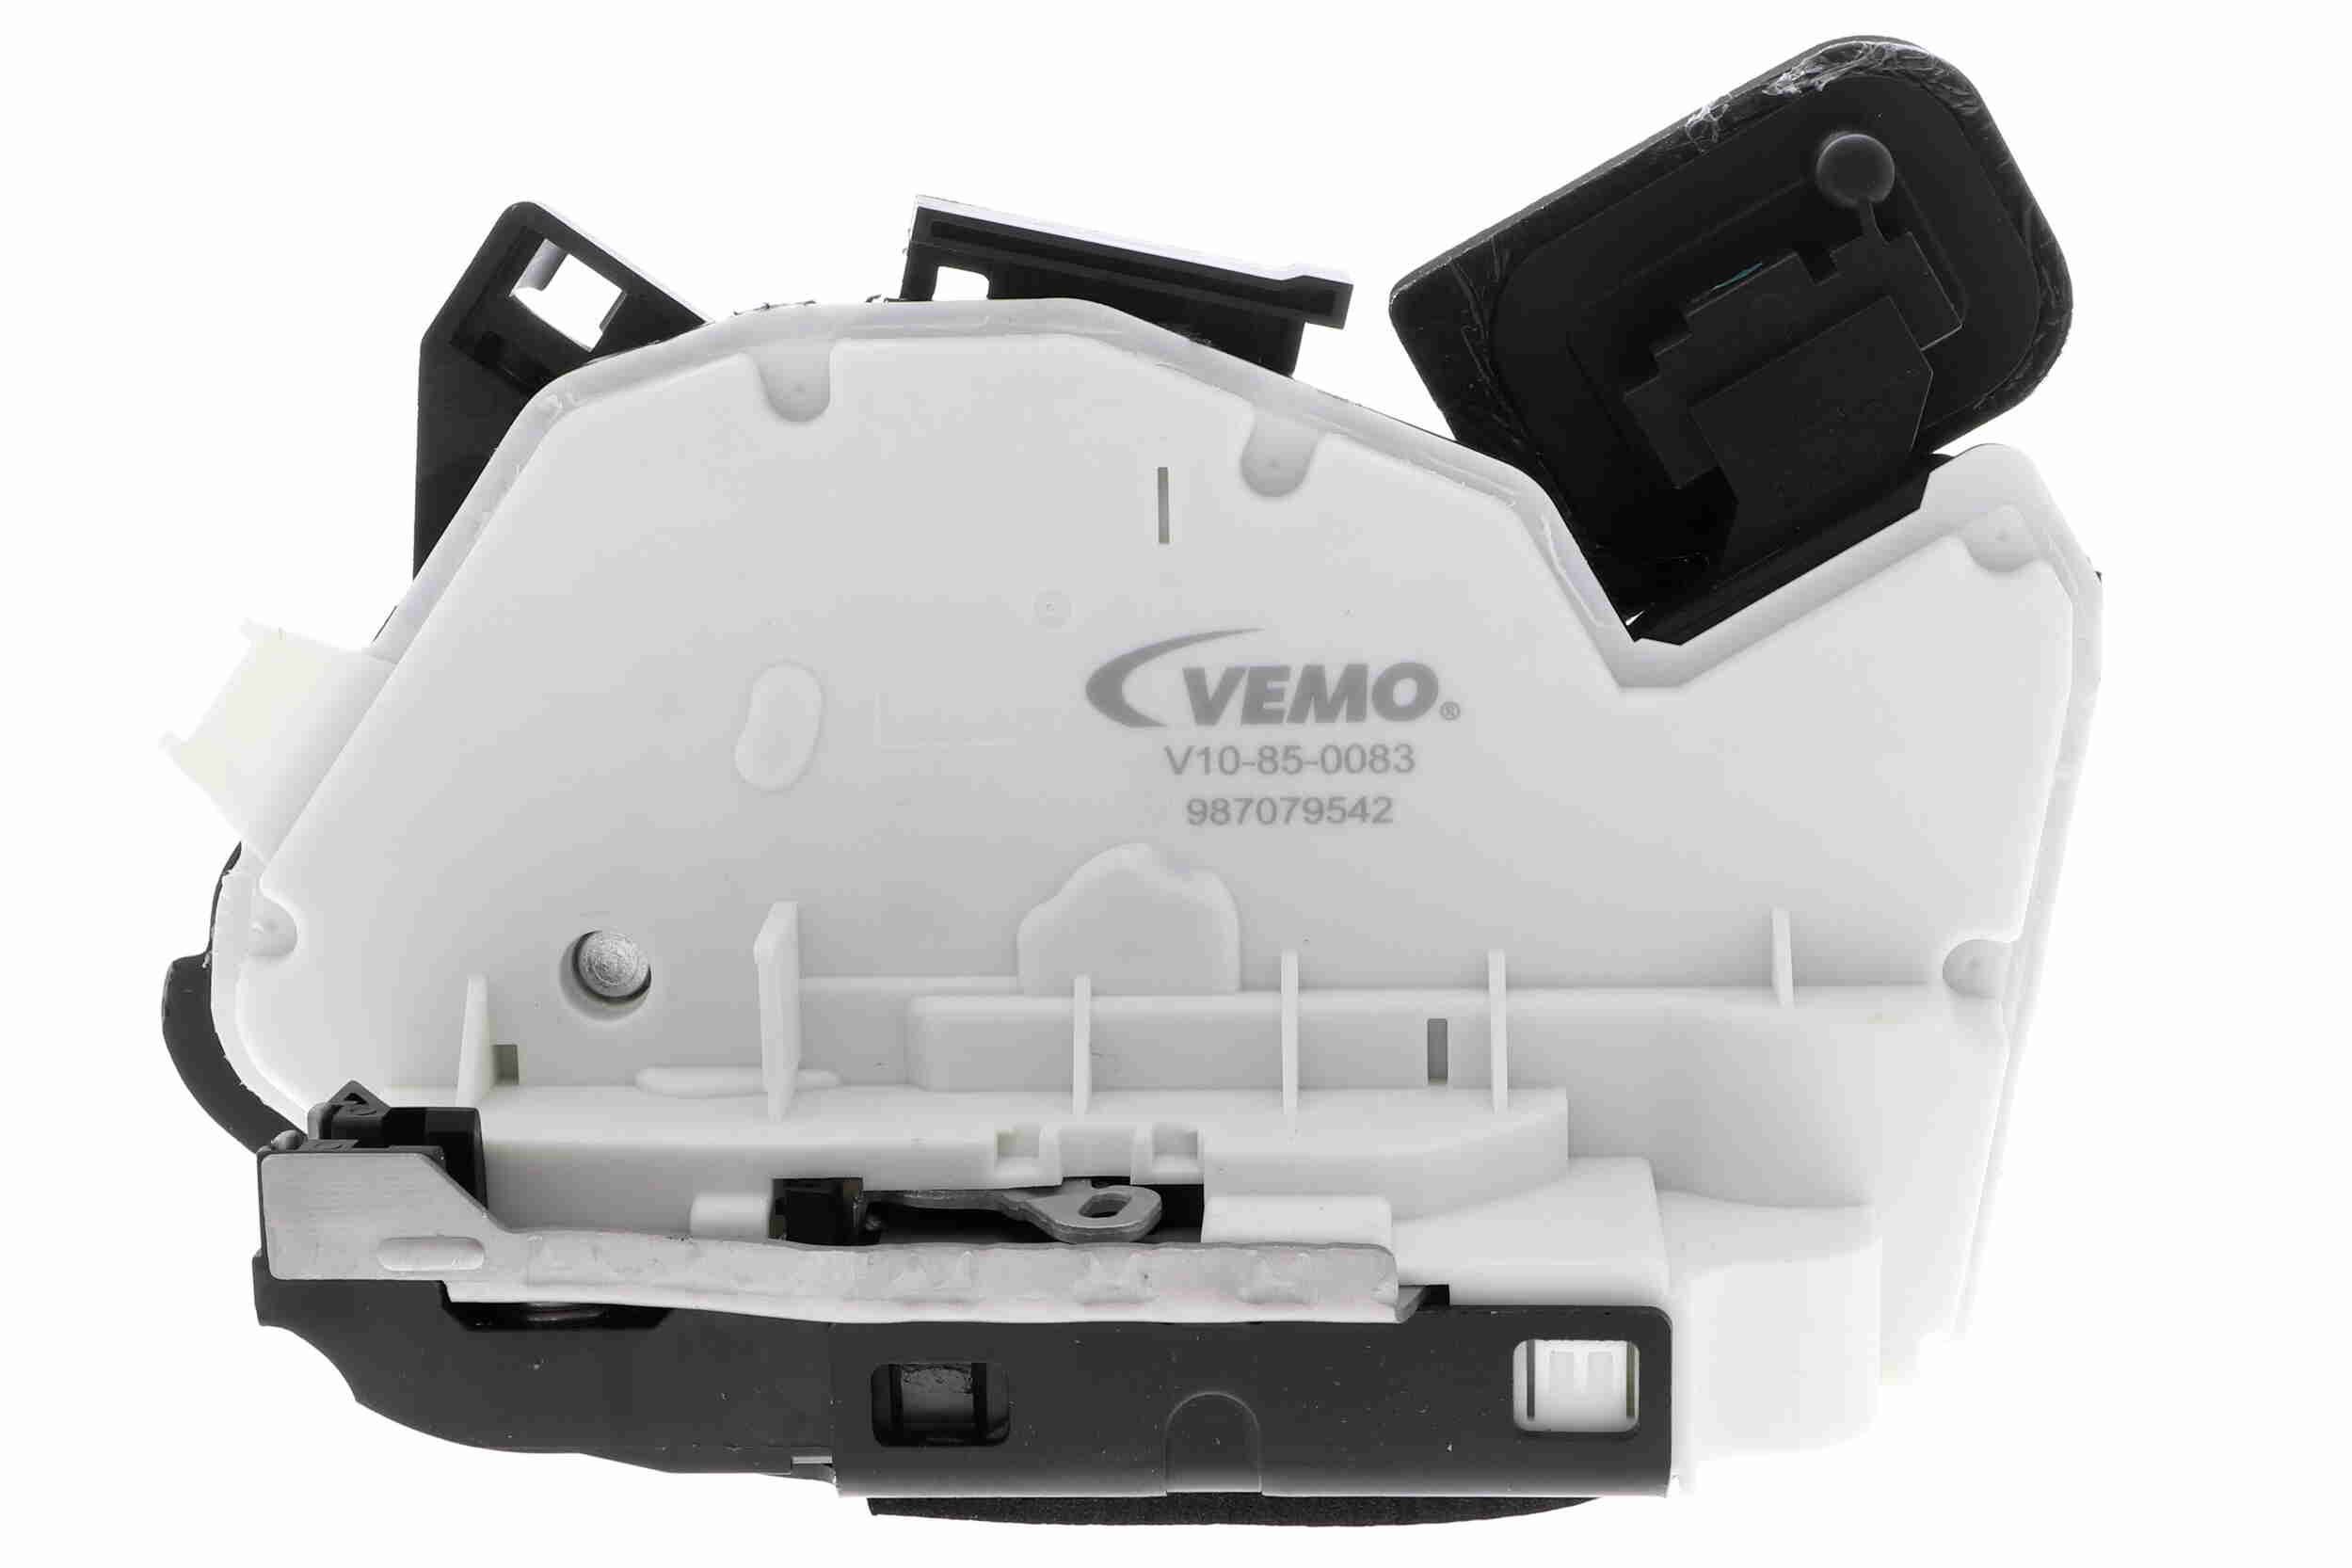 VEMO V10-85-0083 Door lock with Safelock function, with central locking, Left Rear